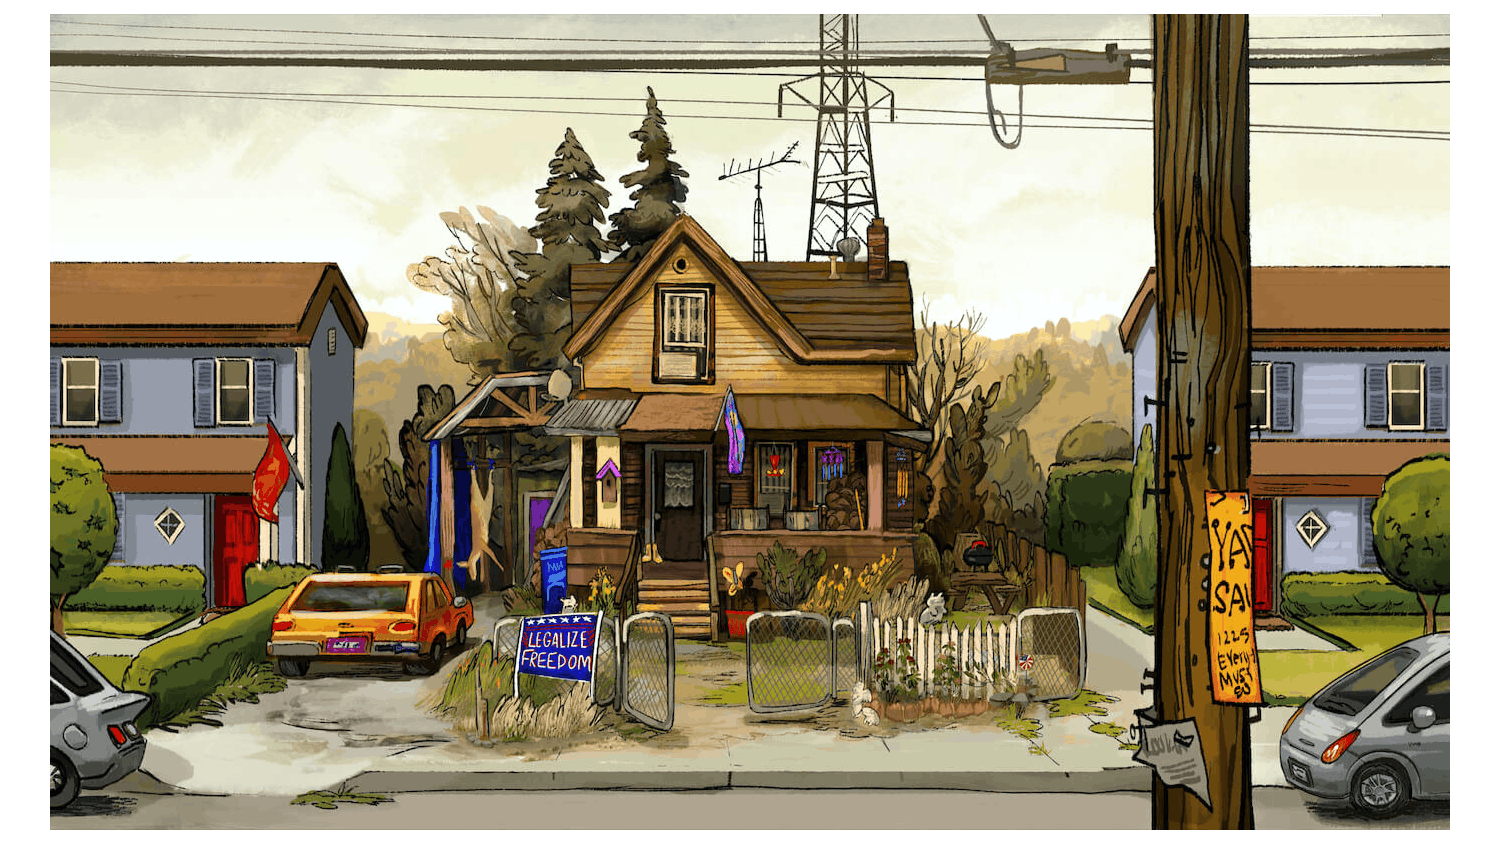 The outside of a brown house. In the driveway is a yellow car and a hanging animal. Out front is a metal gate, a ‘legalize freedom’ sign, some plants, and some knick knicks.